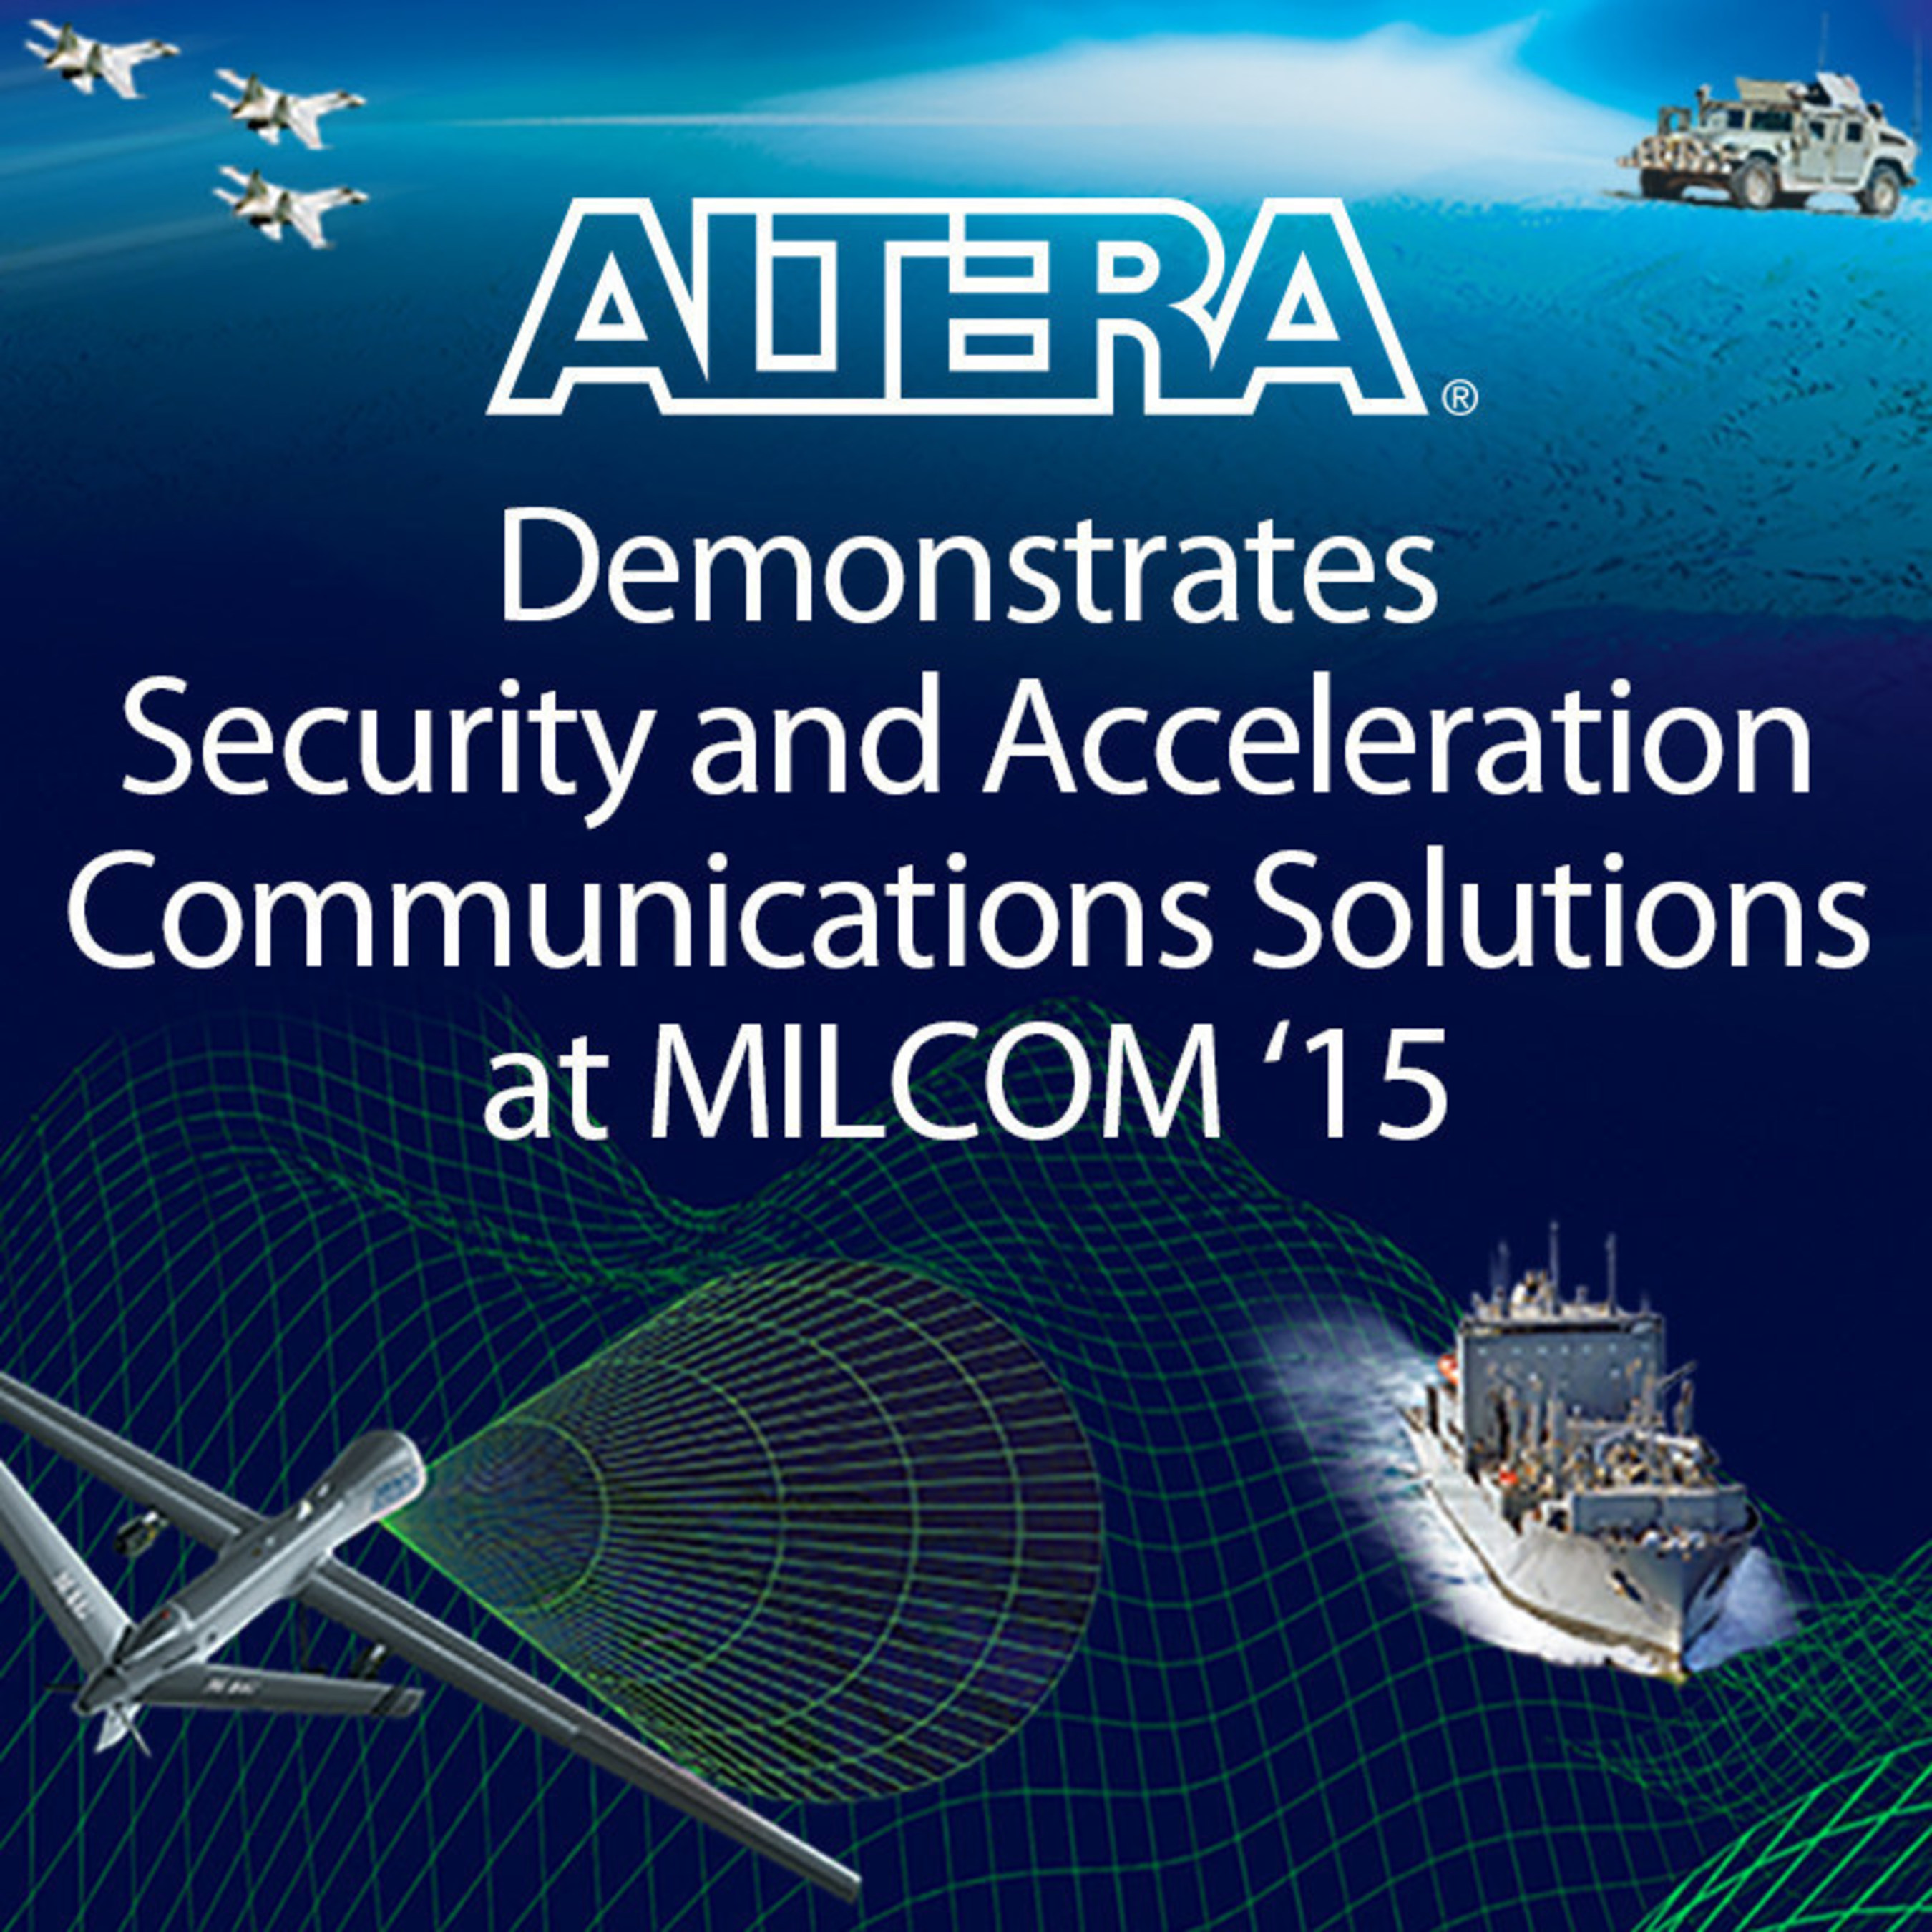 Altera FPGAs enable designers of military communications systems to enhance security and speed packet inspection, among other applications. Altera will be in booth # 1007 at MILCOM 2015, being held in Tampa, Florida, from October 26 to 28.